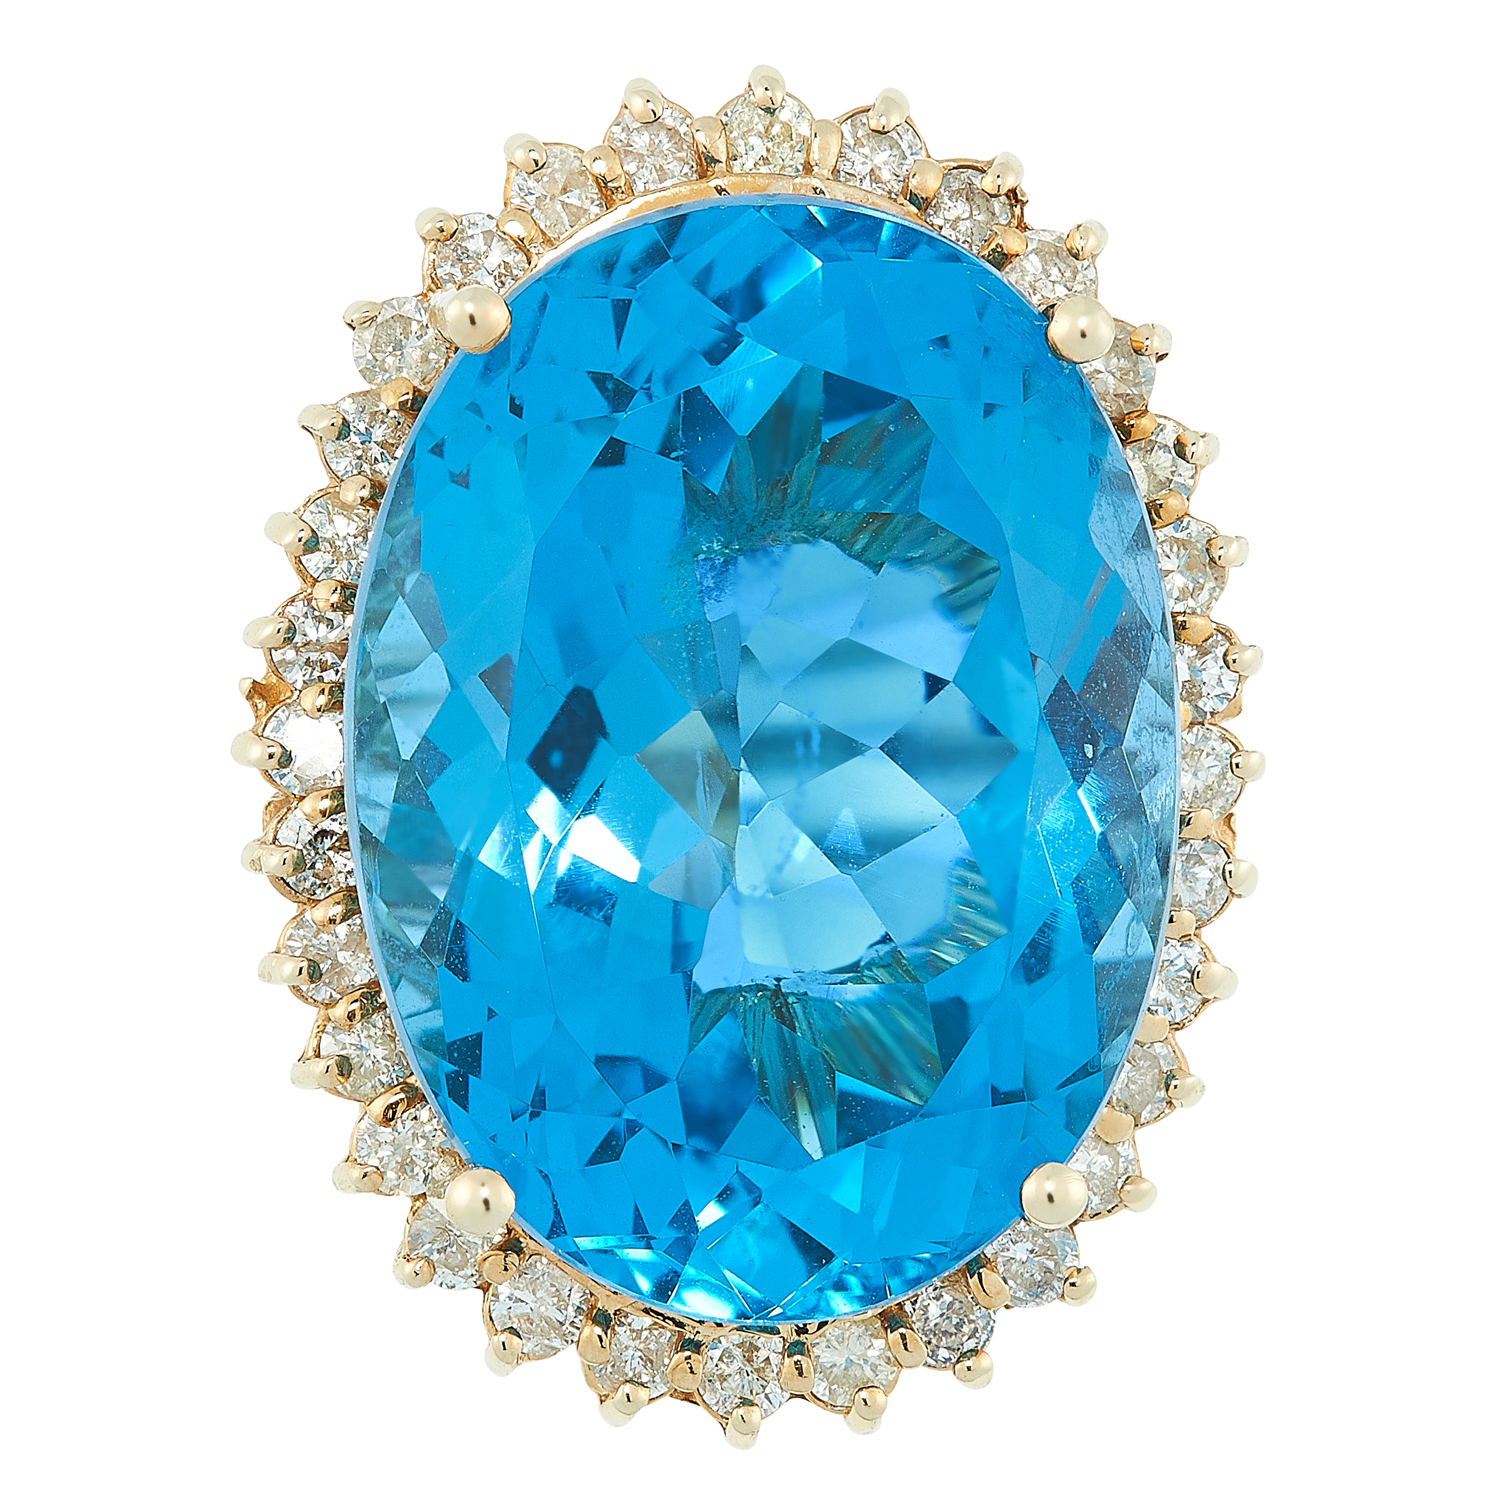 A TOPAZ AND DIAMOND CLUSTER RING set with an oval cut topaz of 27.8 carats, in a border of round cut